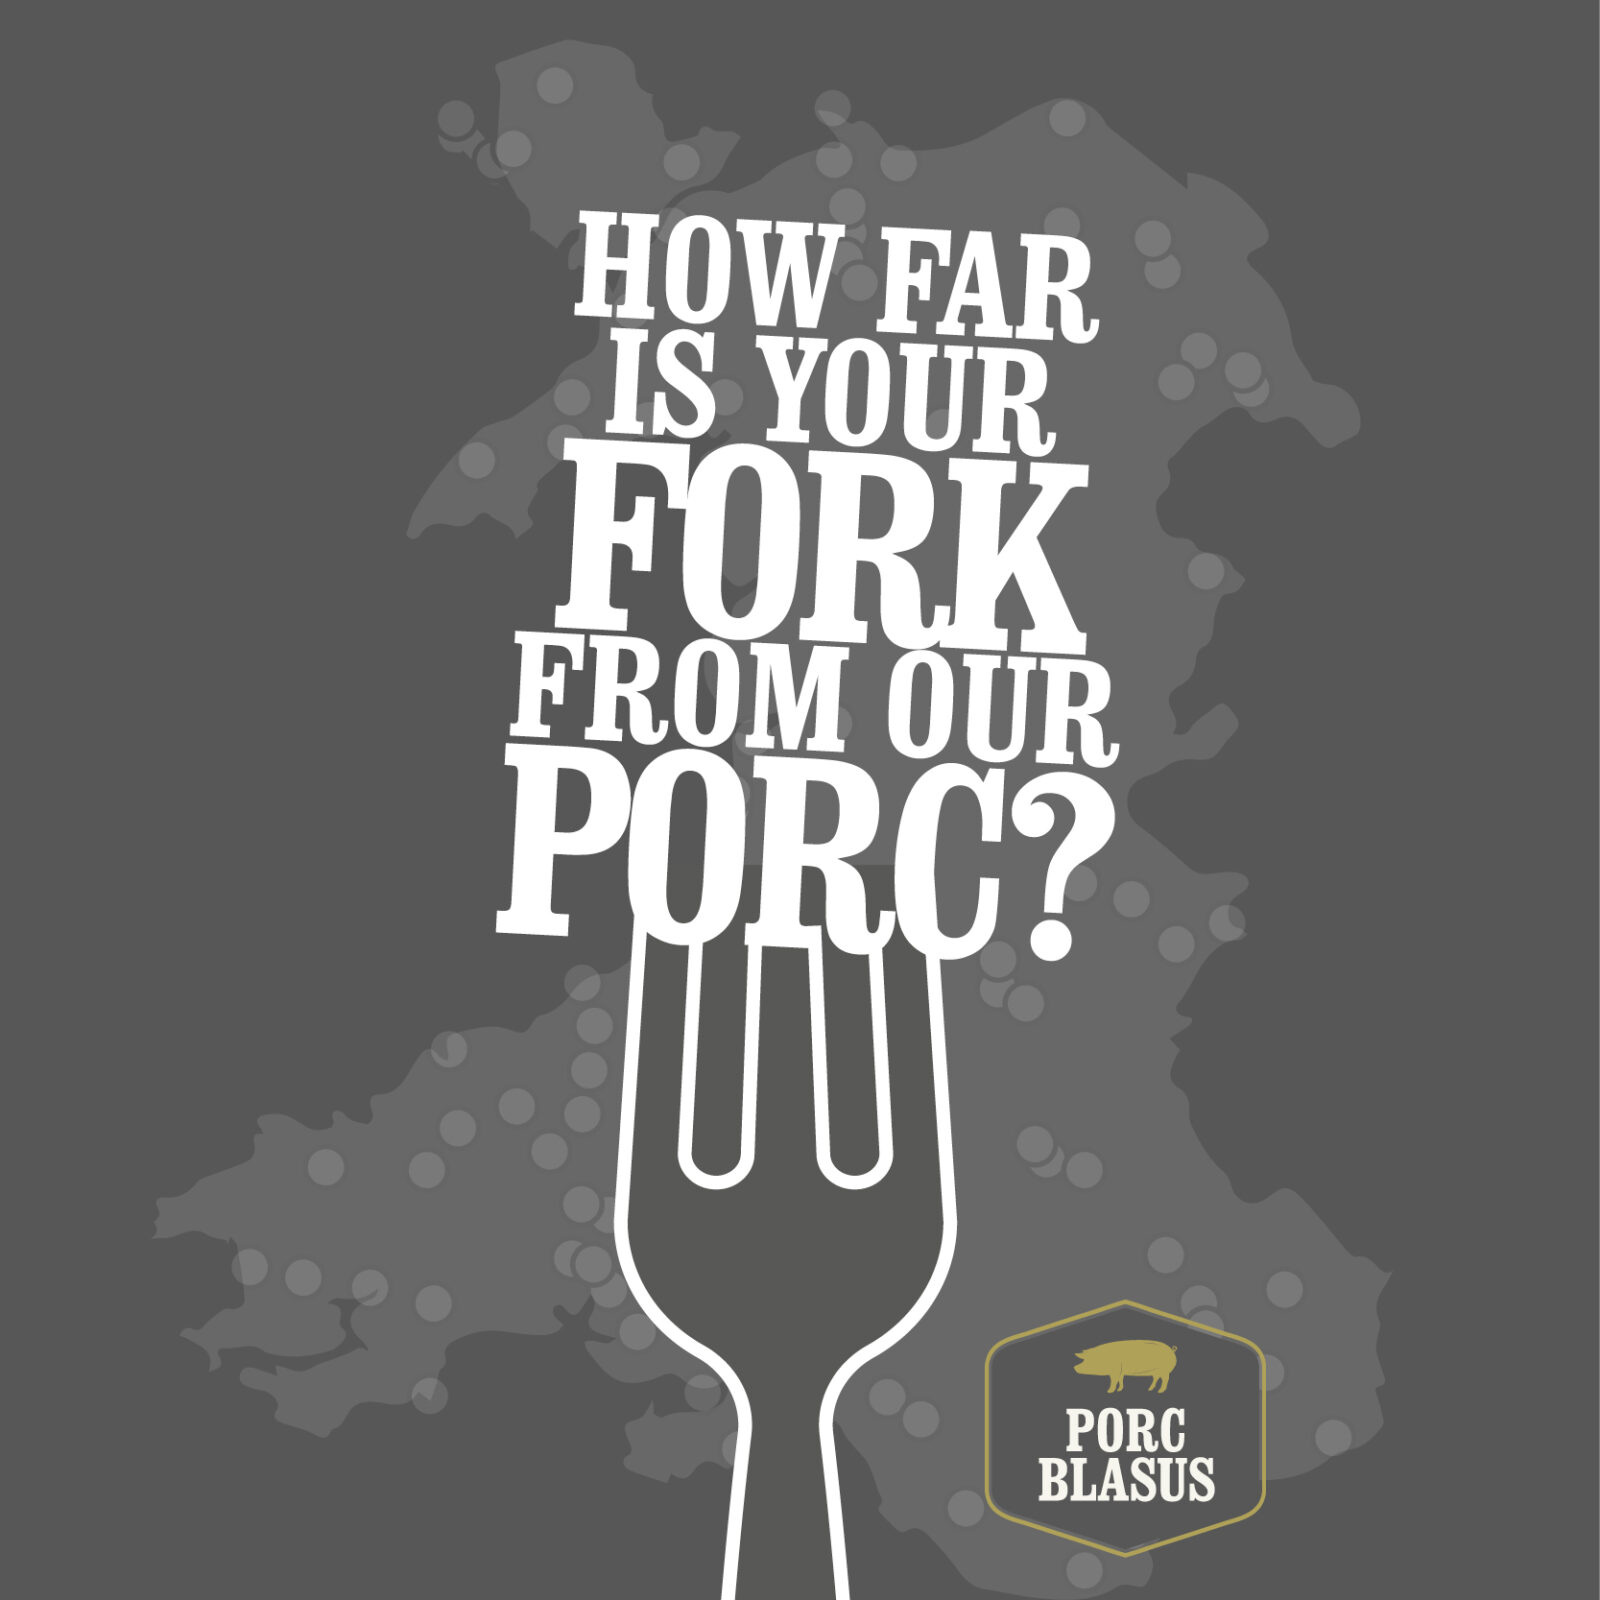 How far is your fork from our porc?